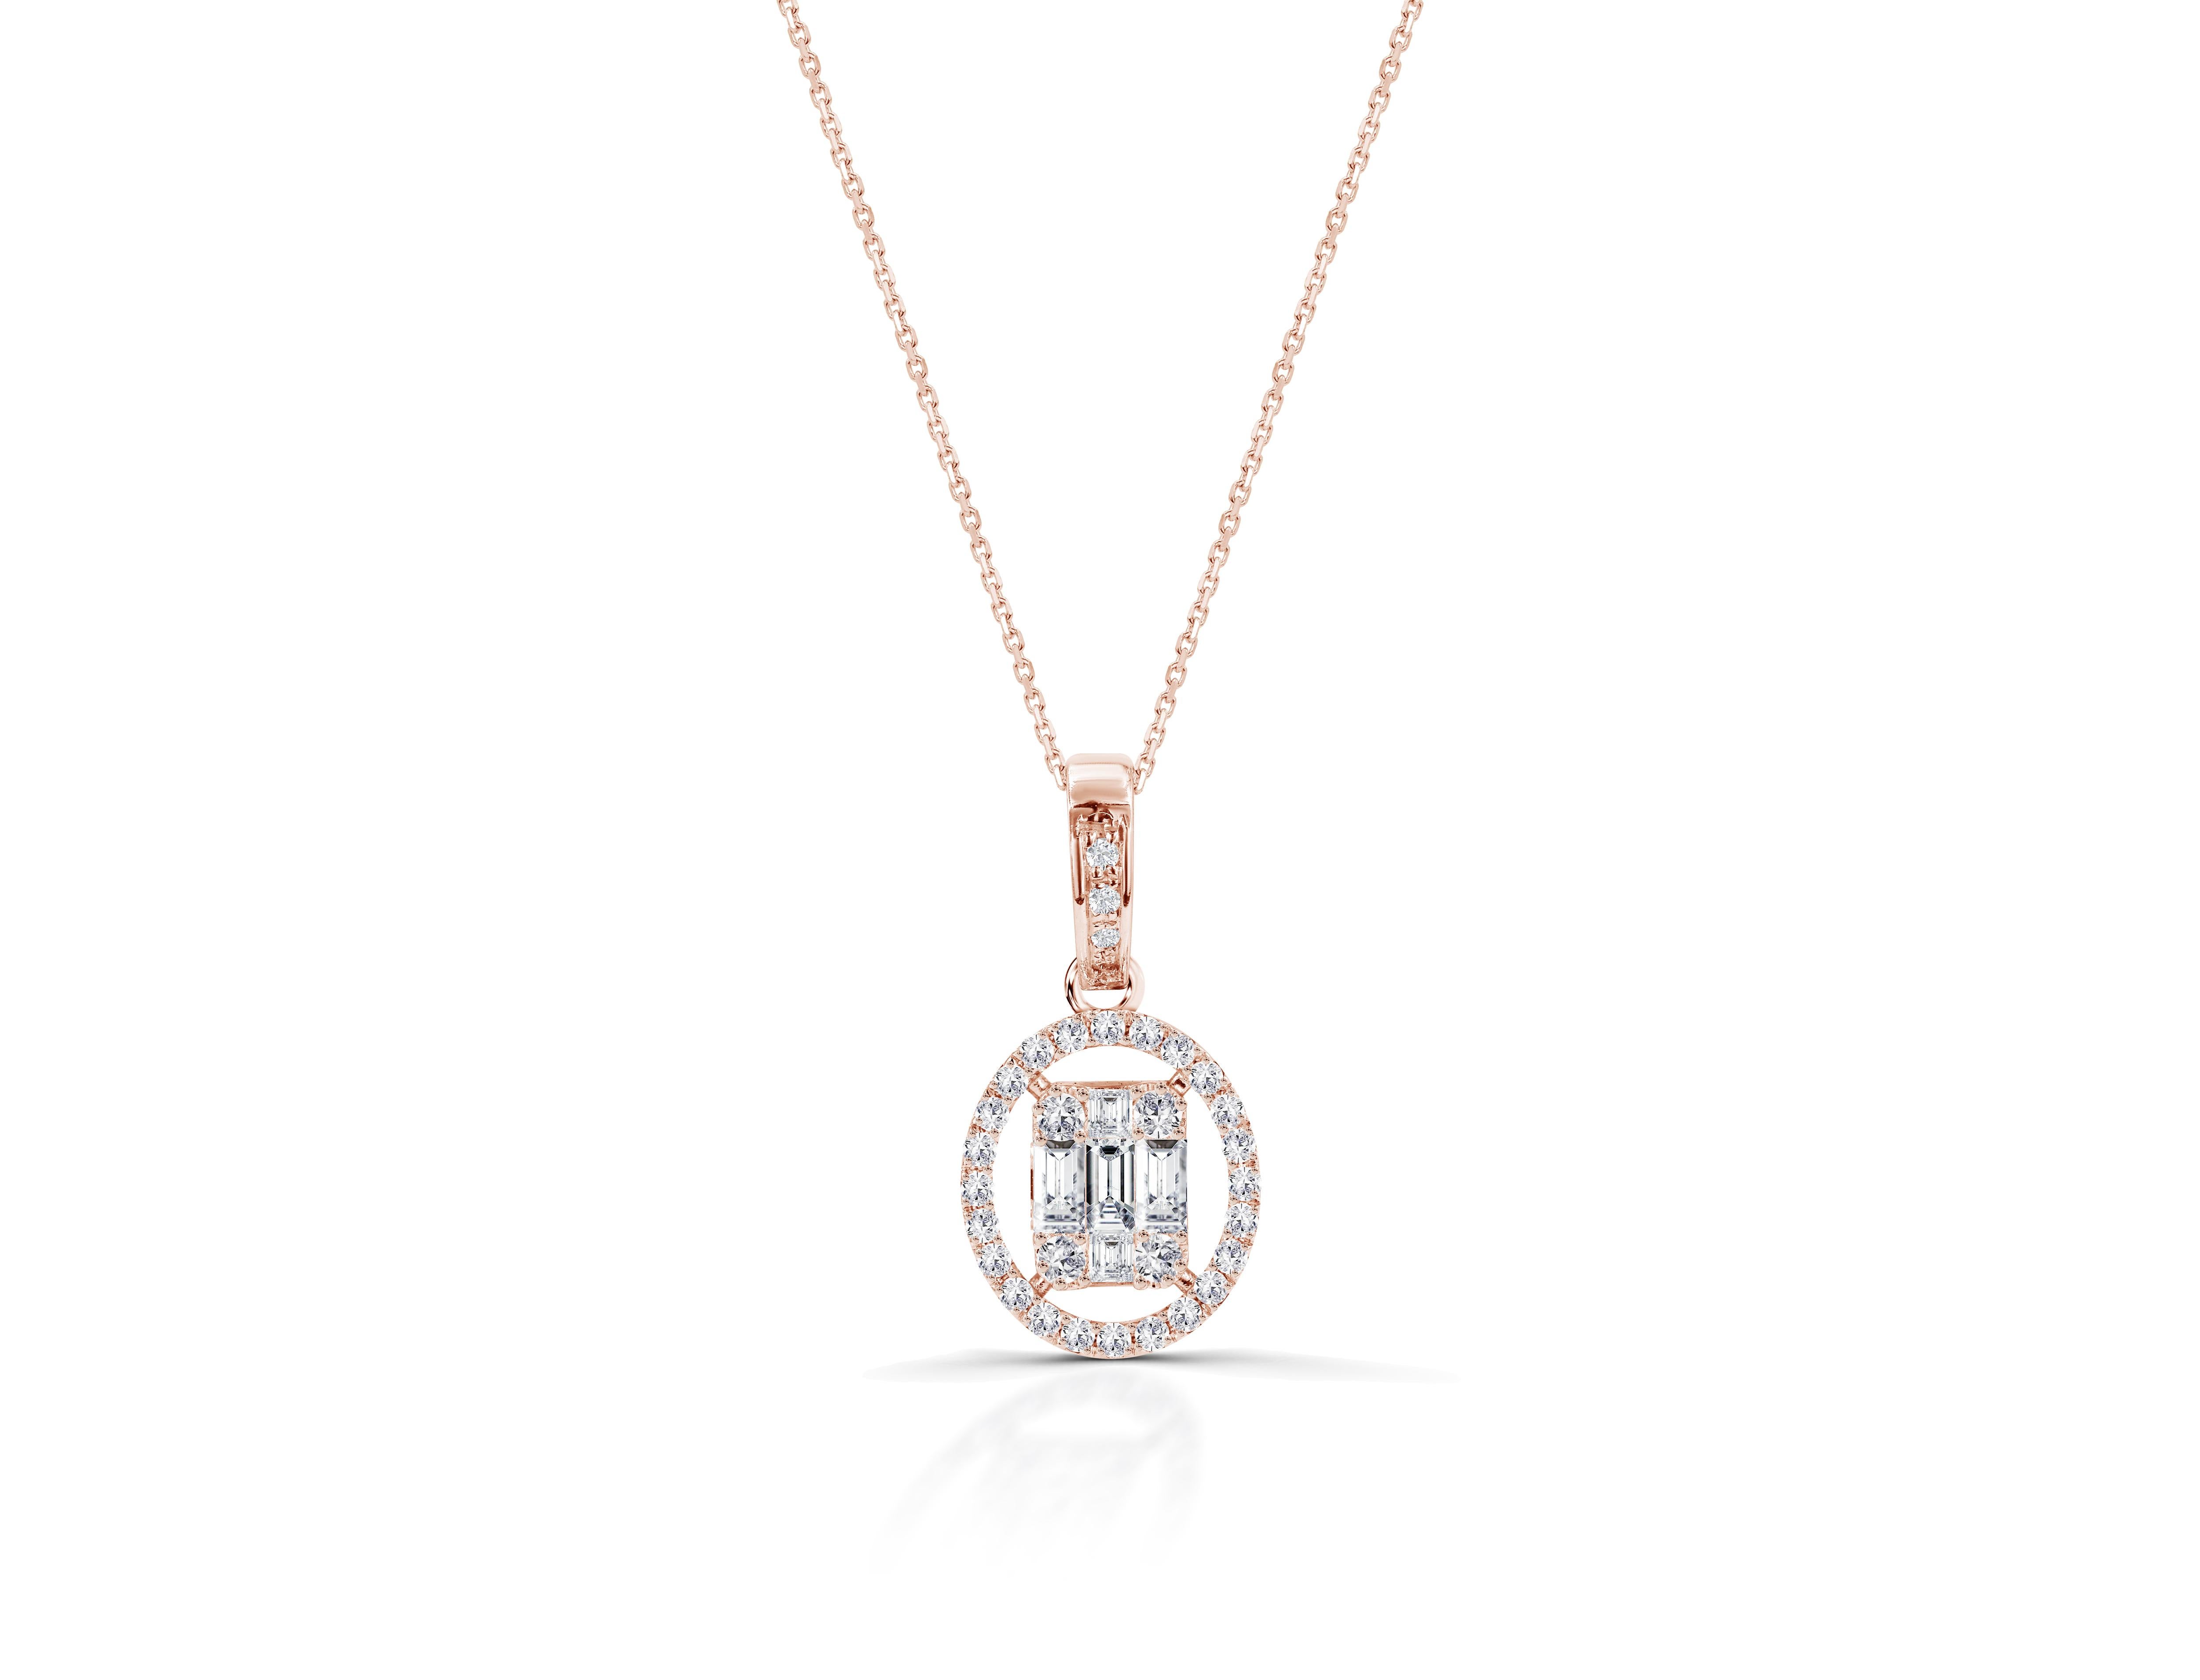 Halo baguette diamond necklace, baguette circle necklace, Elegant diamond necklace, Wedding necklace, 14k gold, Pave setted diamonds, gift for her

Baguette necklace, diamond cluster, Halo baguette cut diamond, wedding necklace, diamond pendant,